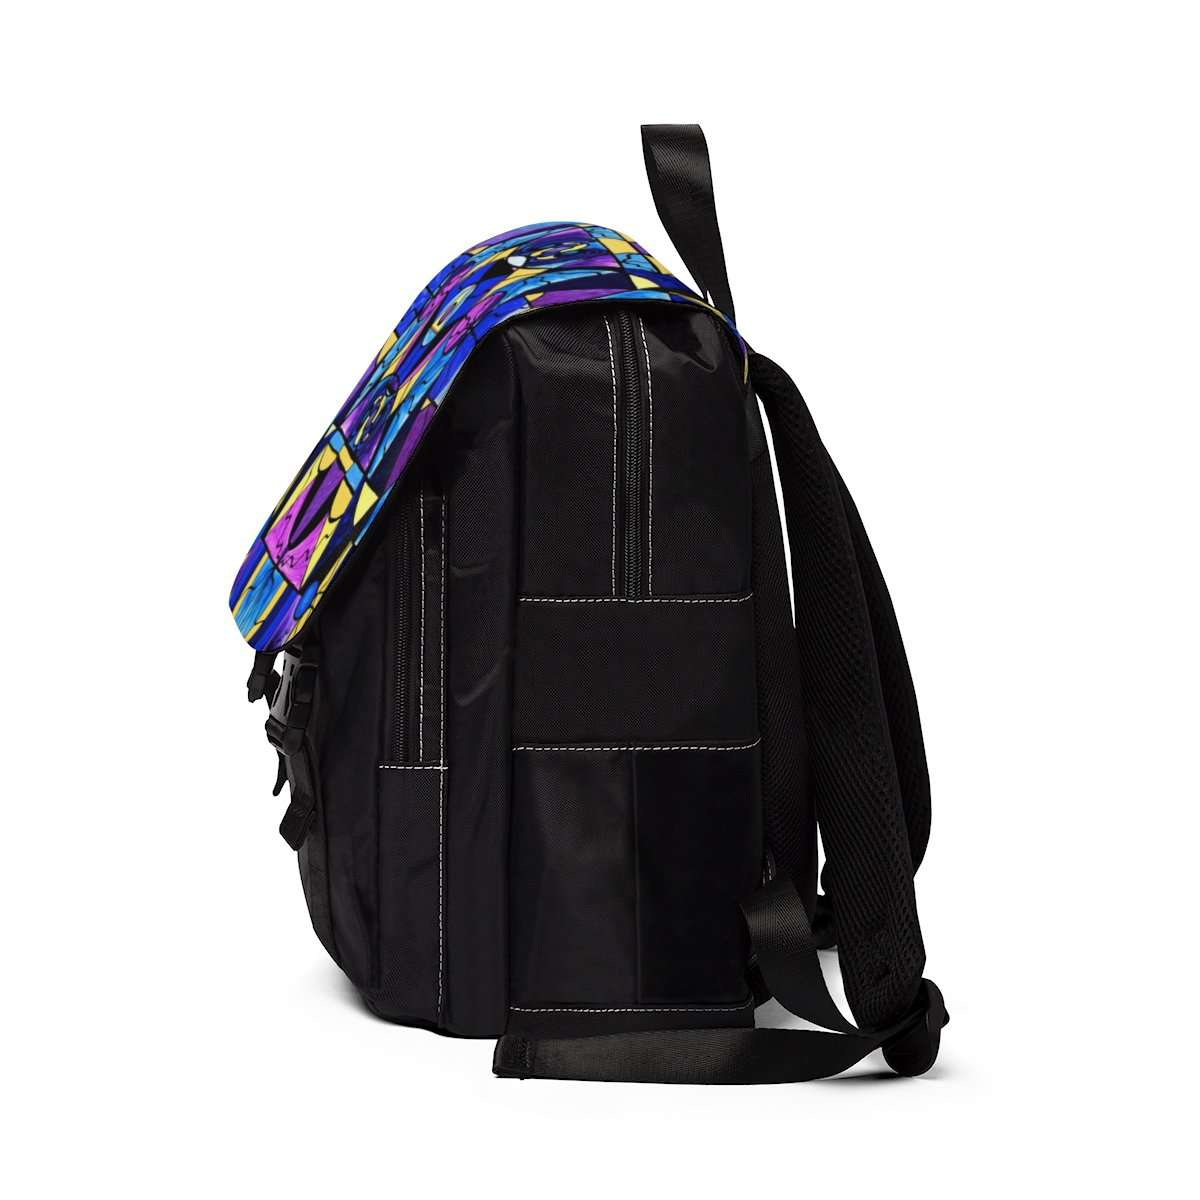 we-are-the-best-place-to-shop-i-know-unisex-casual-shoulder-backpack-sale_2.jpg